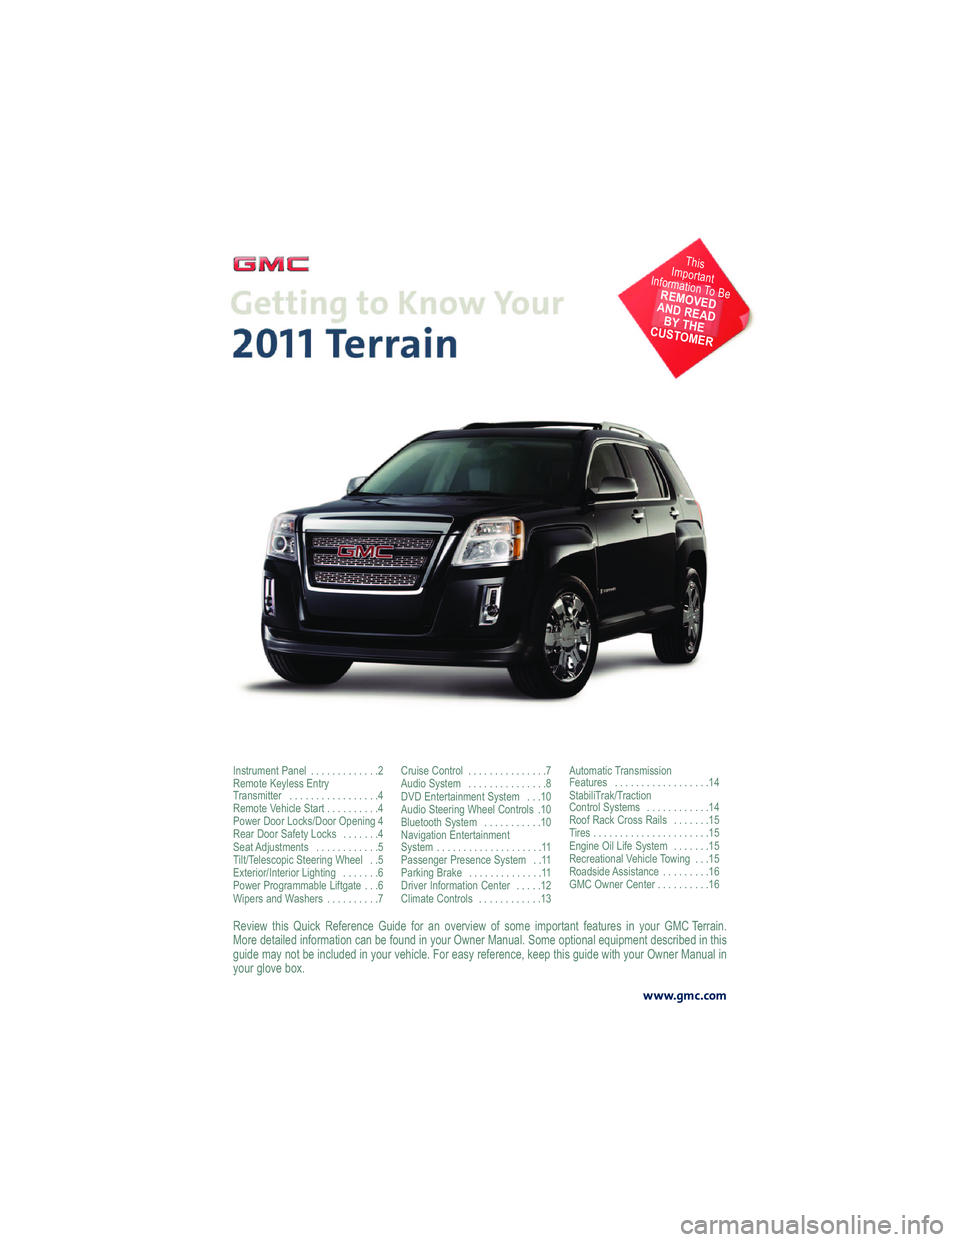 GMC TERRAIN 2011  Get To Know Guide &2C62 D  A5 6@  % B60 8 & 232 ?2 ;02   B61 2 3< ?  . ; < C2 ?C 62 D  < 3  @ < : 2 6: =<?A. ;A  32 .AB ?2 @ 6;  F < B ?   !  ( 2 ??. 6;  
! <?2  1 2A. 692 1  6; 3< ?: .A6< ; 0 . ; / 2  3< B;1 6;  F